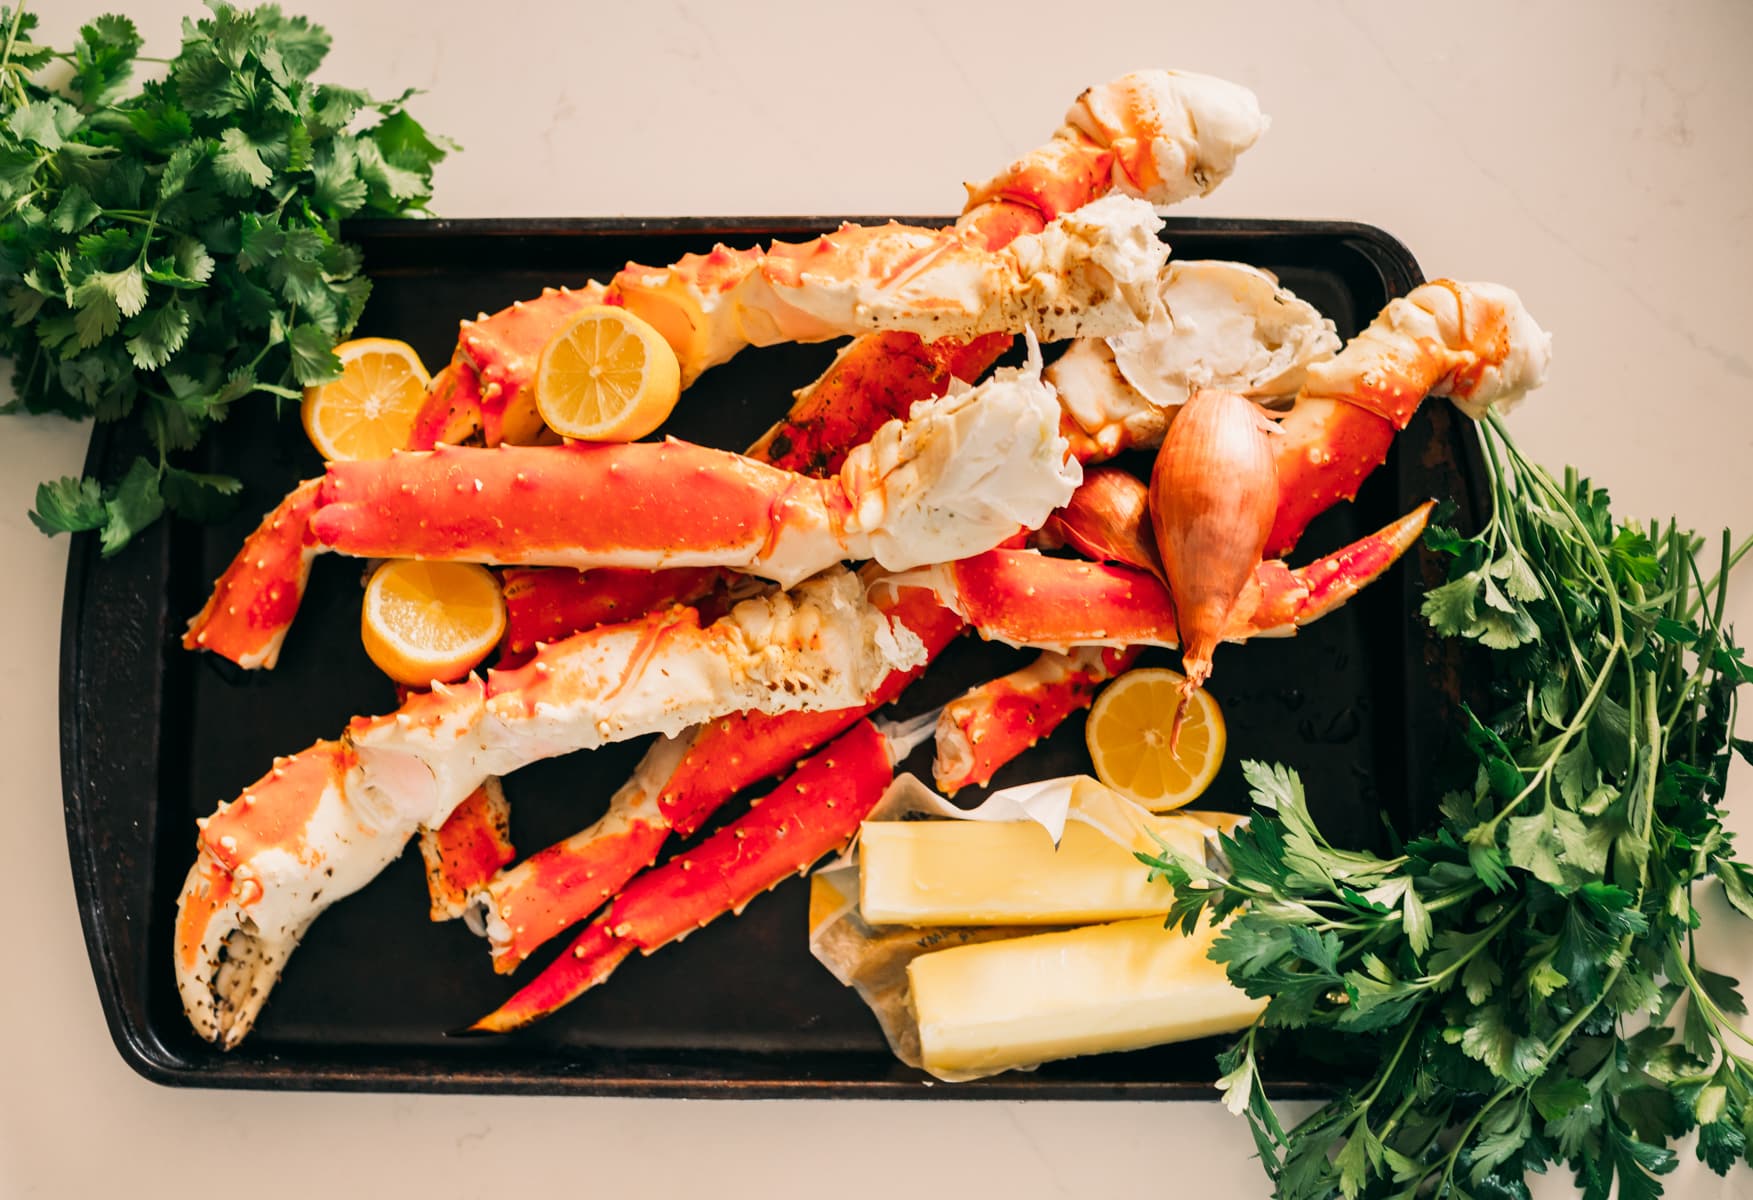 Ingredients for buttery grilled crab on a tray.